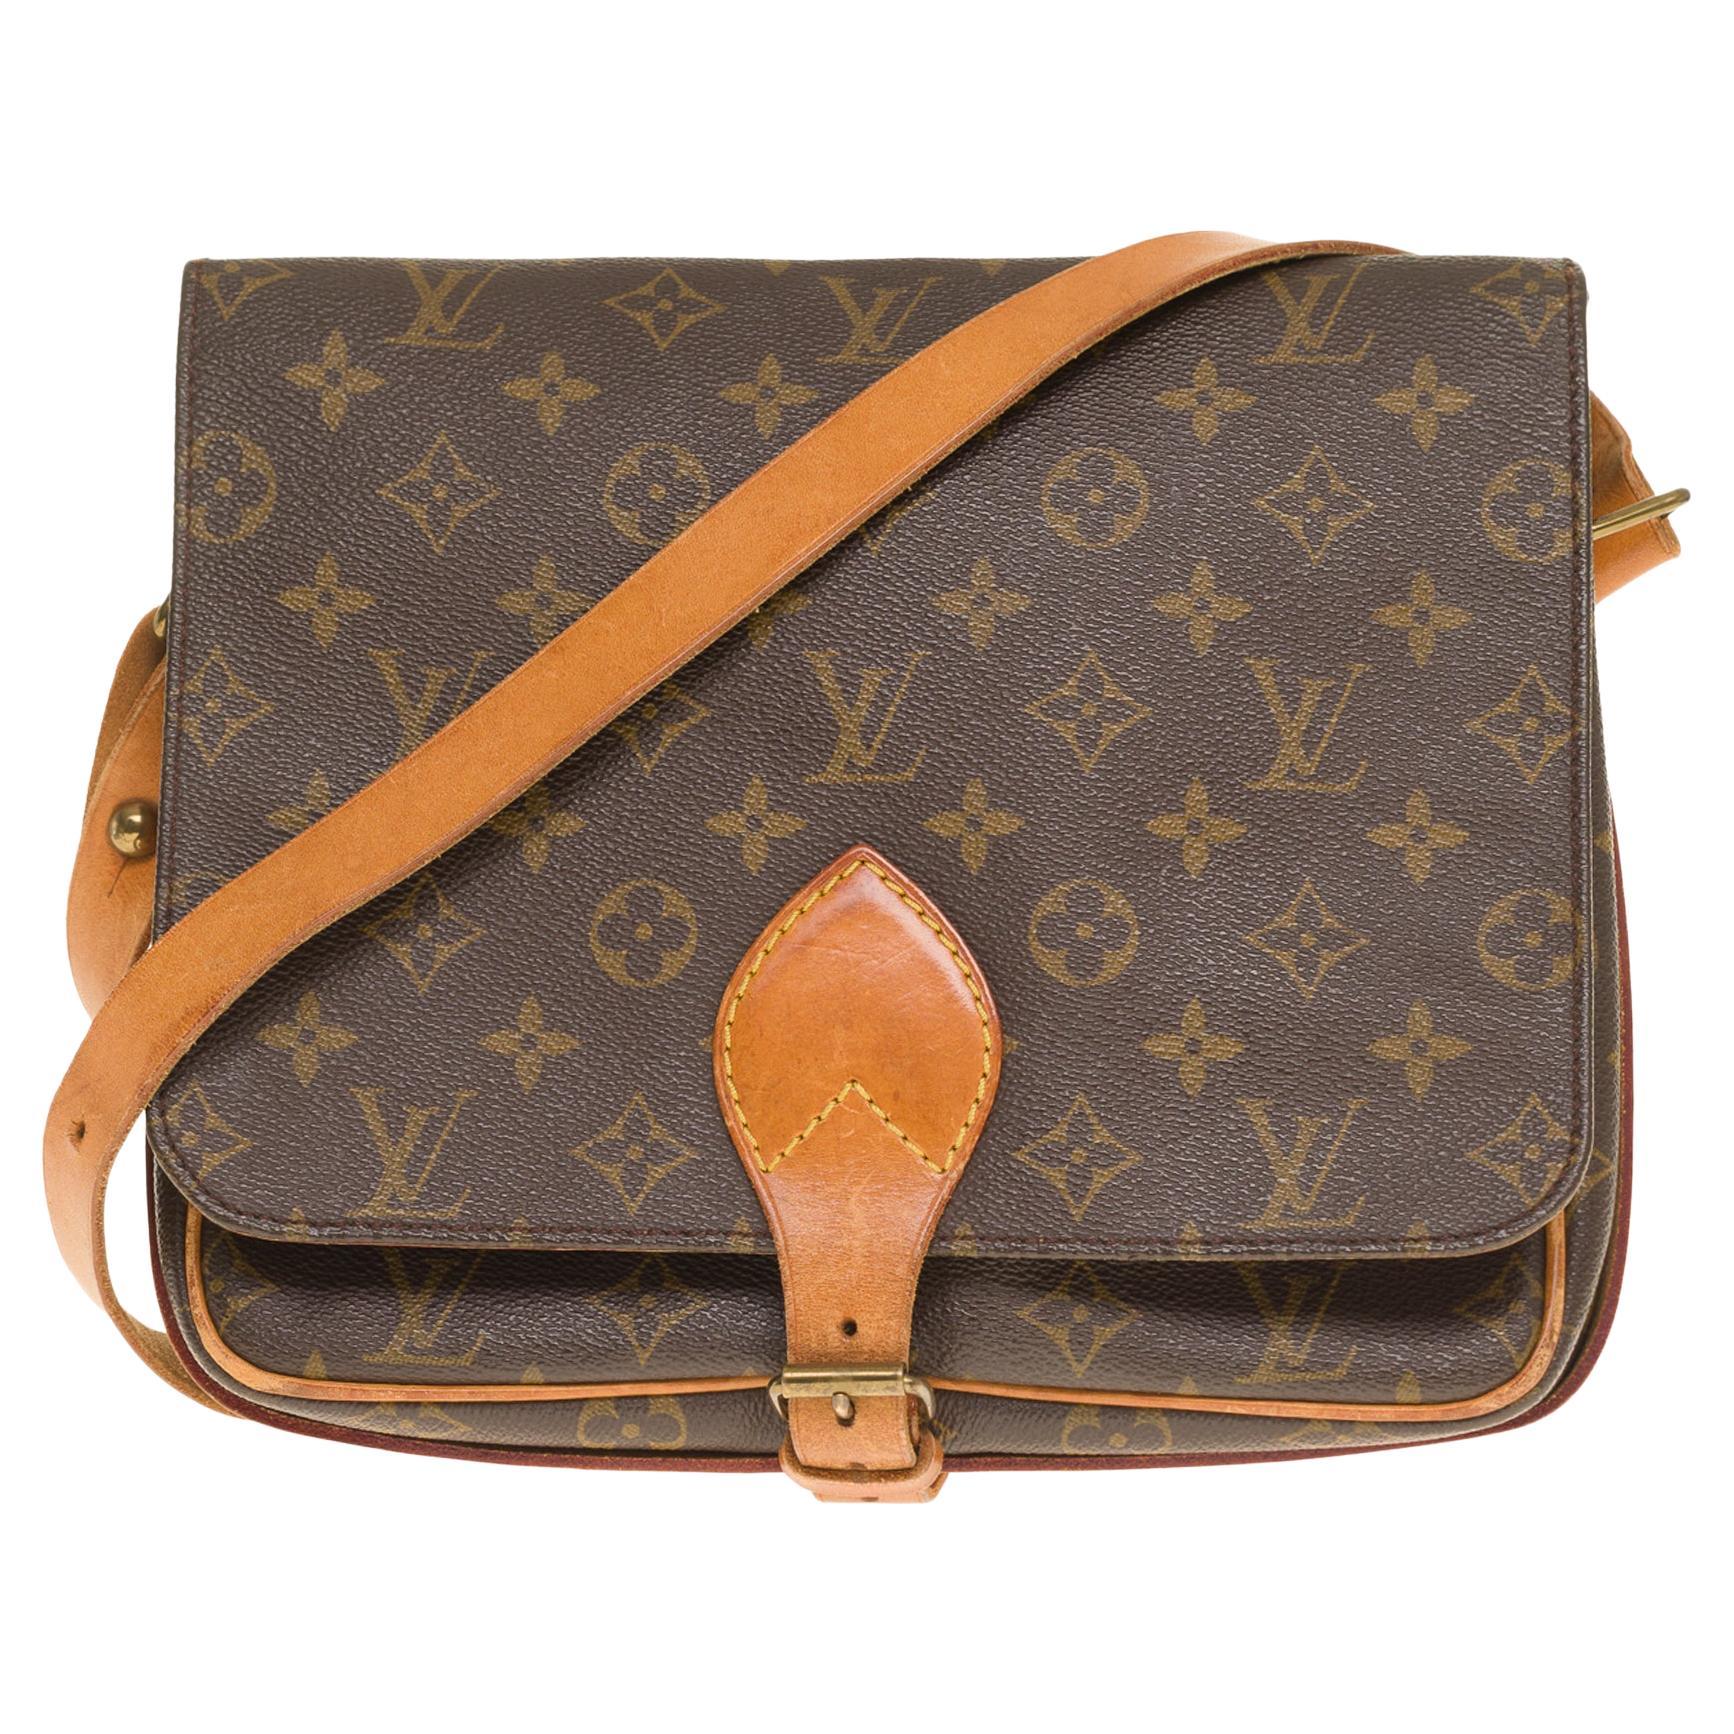 Louis Vuitton Cartouchière GM shoulder bag in brown canvas and brown leather 